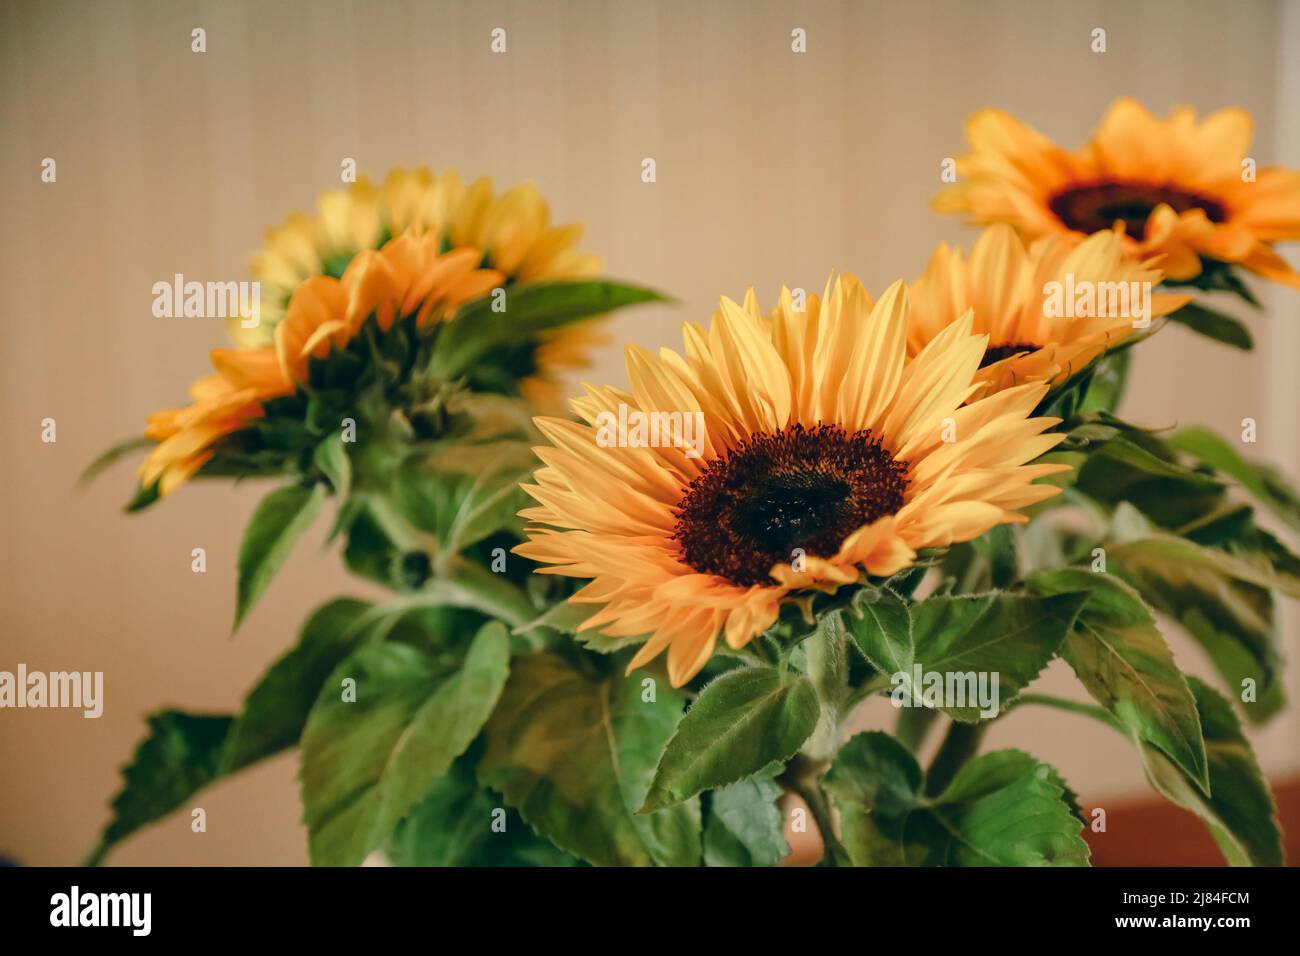 Bundle of sunflower blooms on kitchen table. House interior decorating. Stock Photo